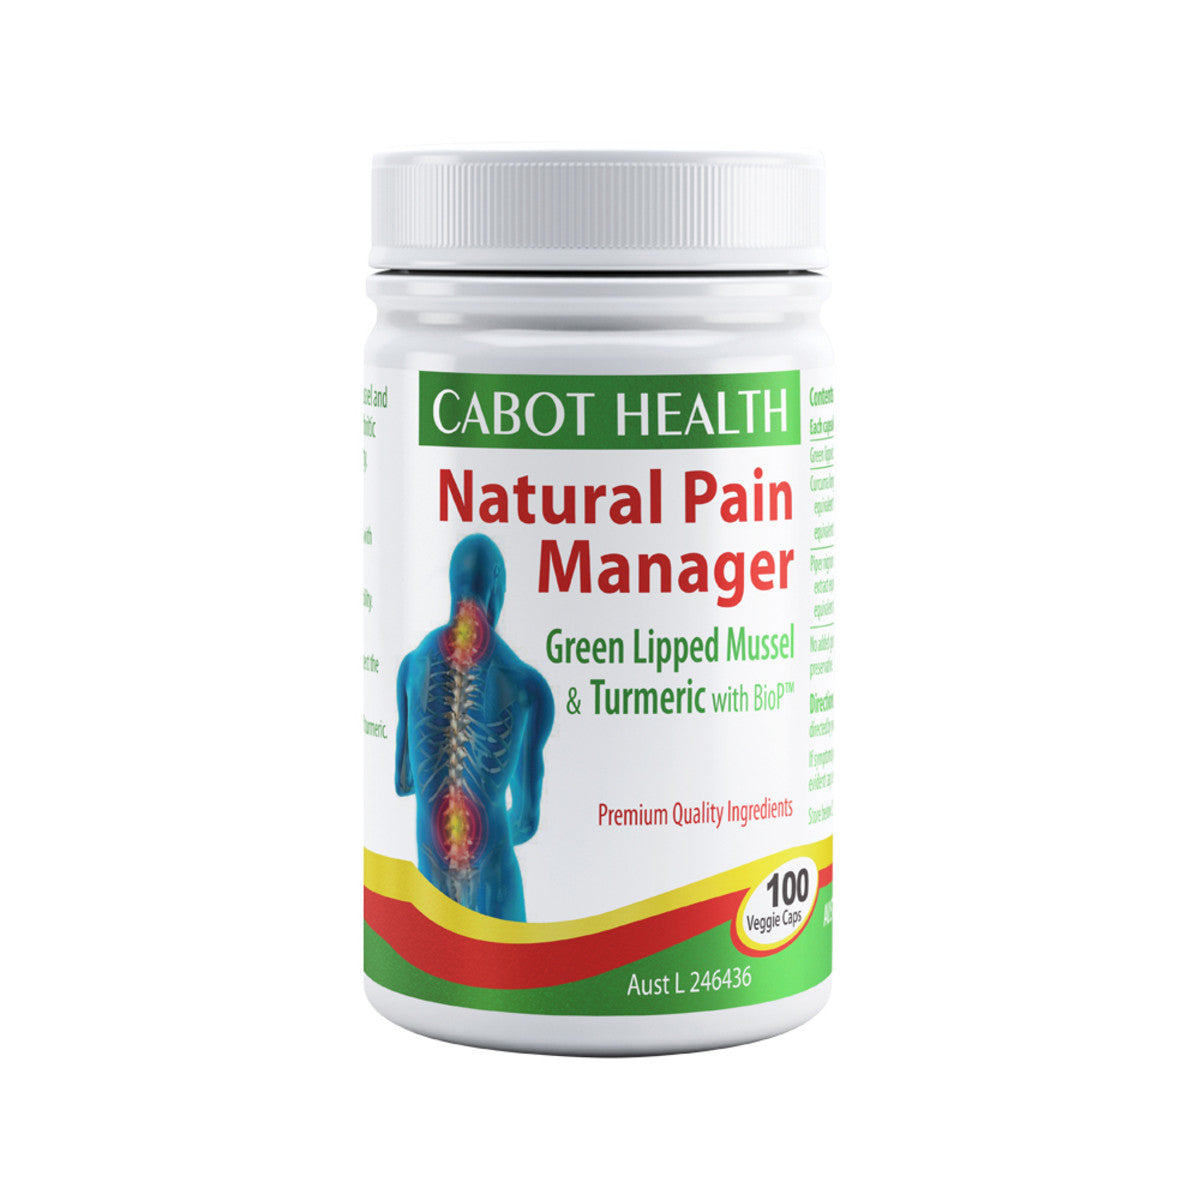 Cabot Health - Natural Pain Manager